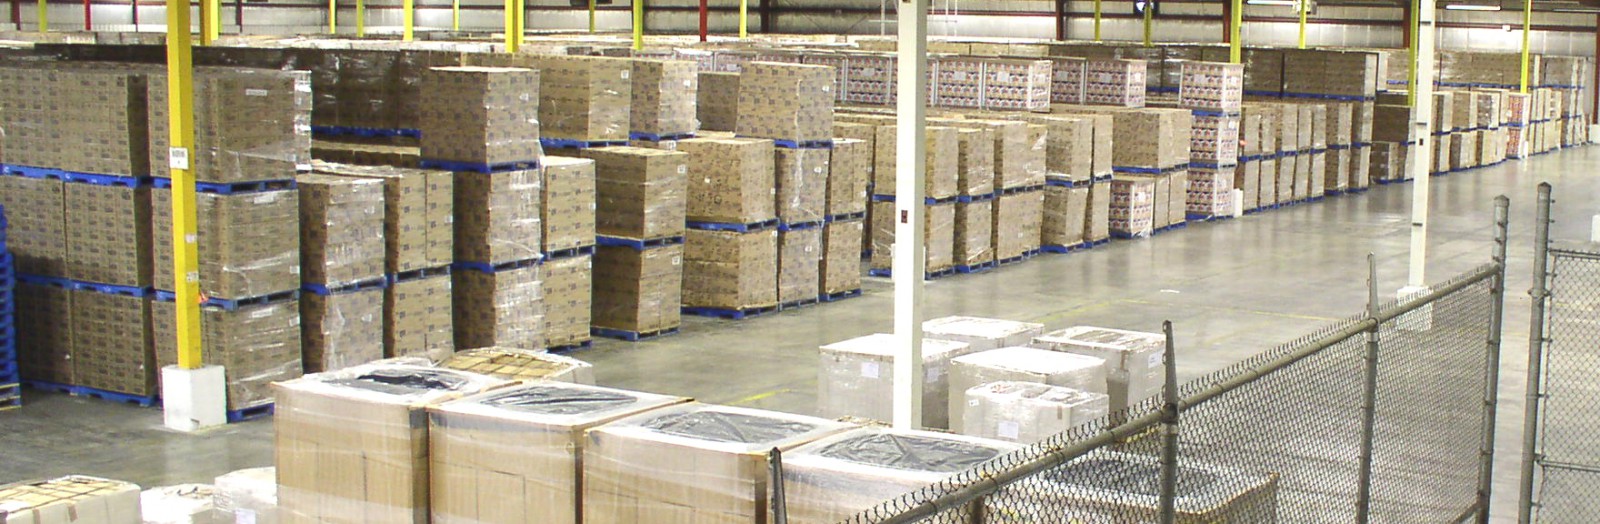 pallets of boxes wrapped in plastic in rows in warehouse